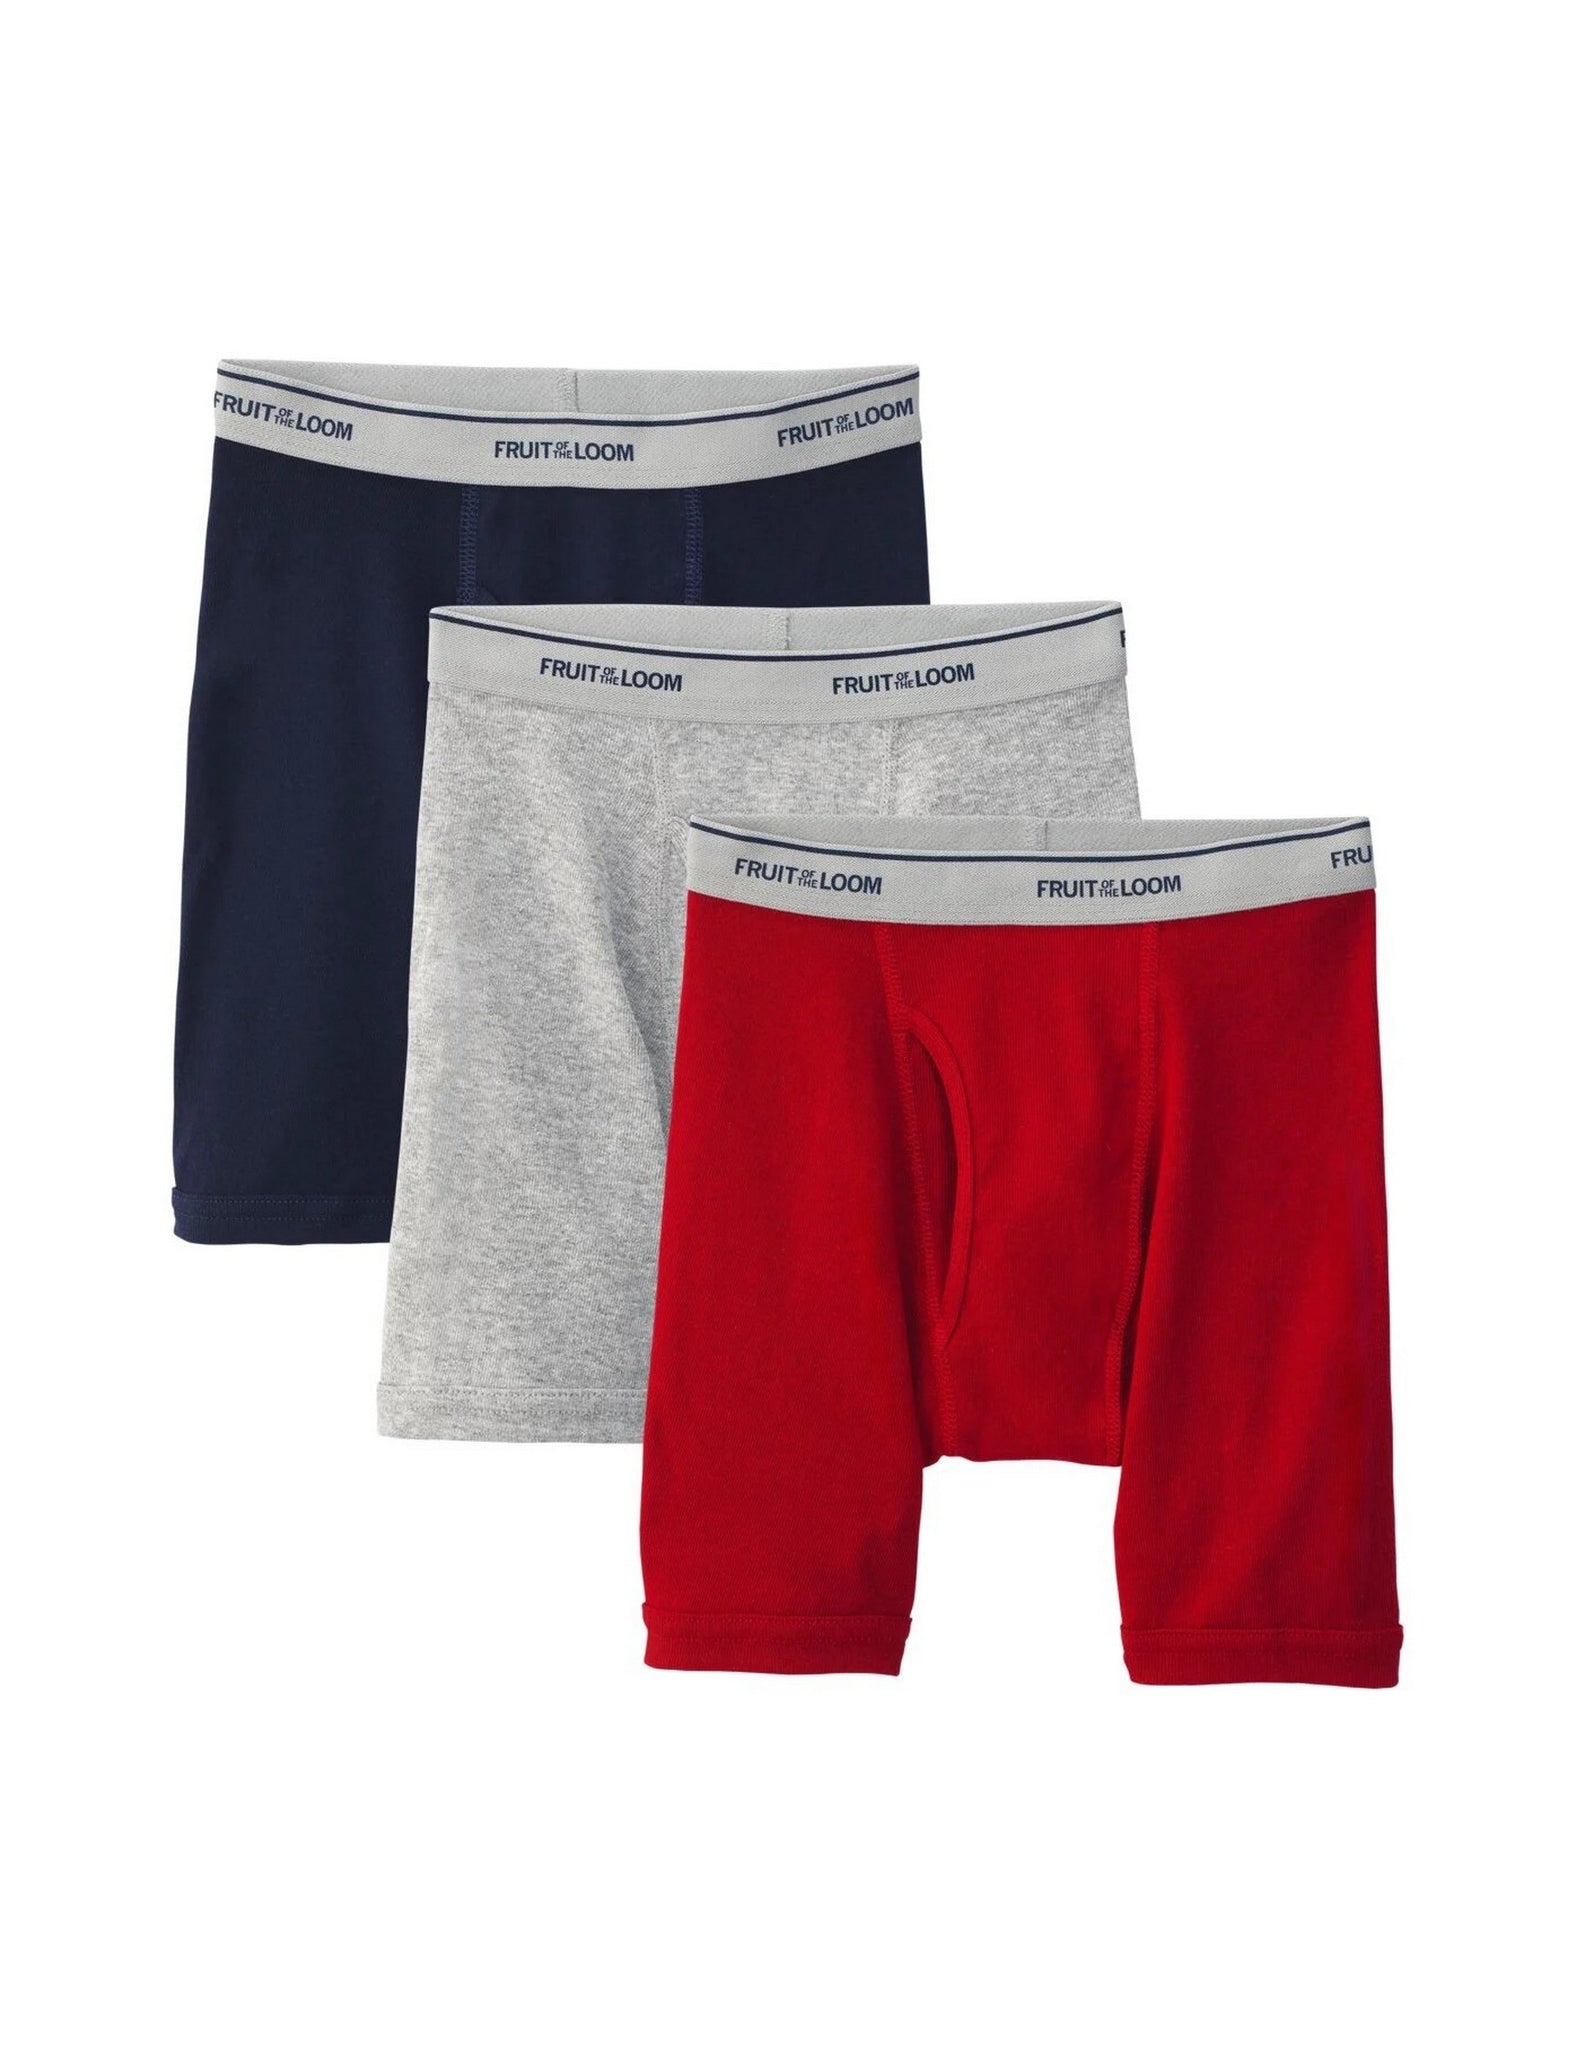 Fruit of the loom Boys' boxer brief 3 pack